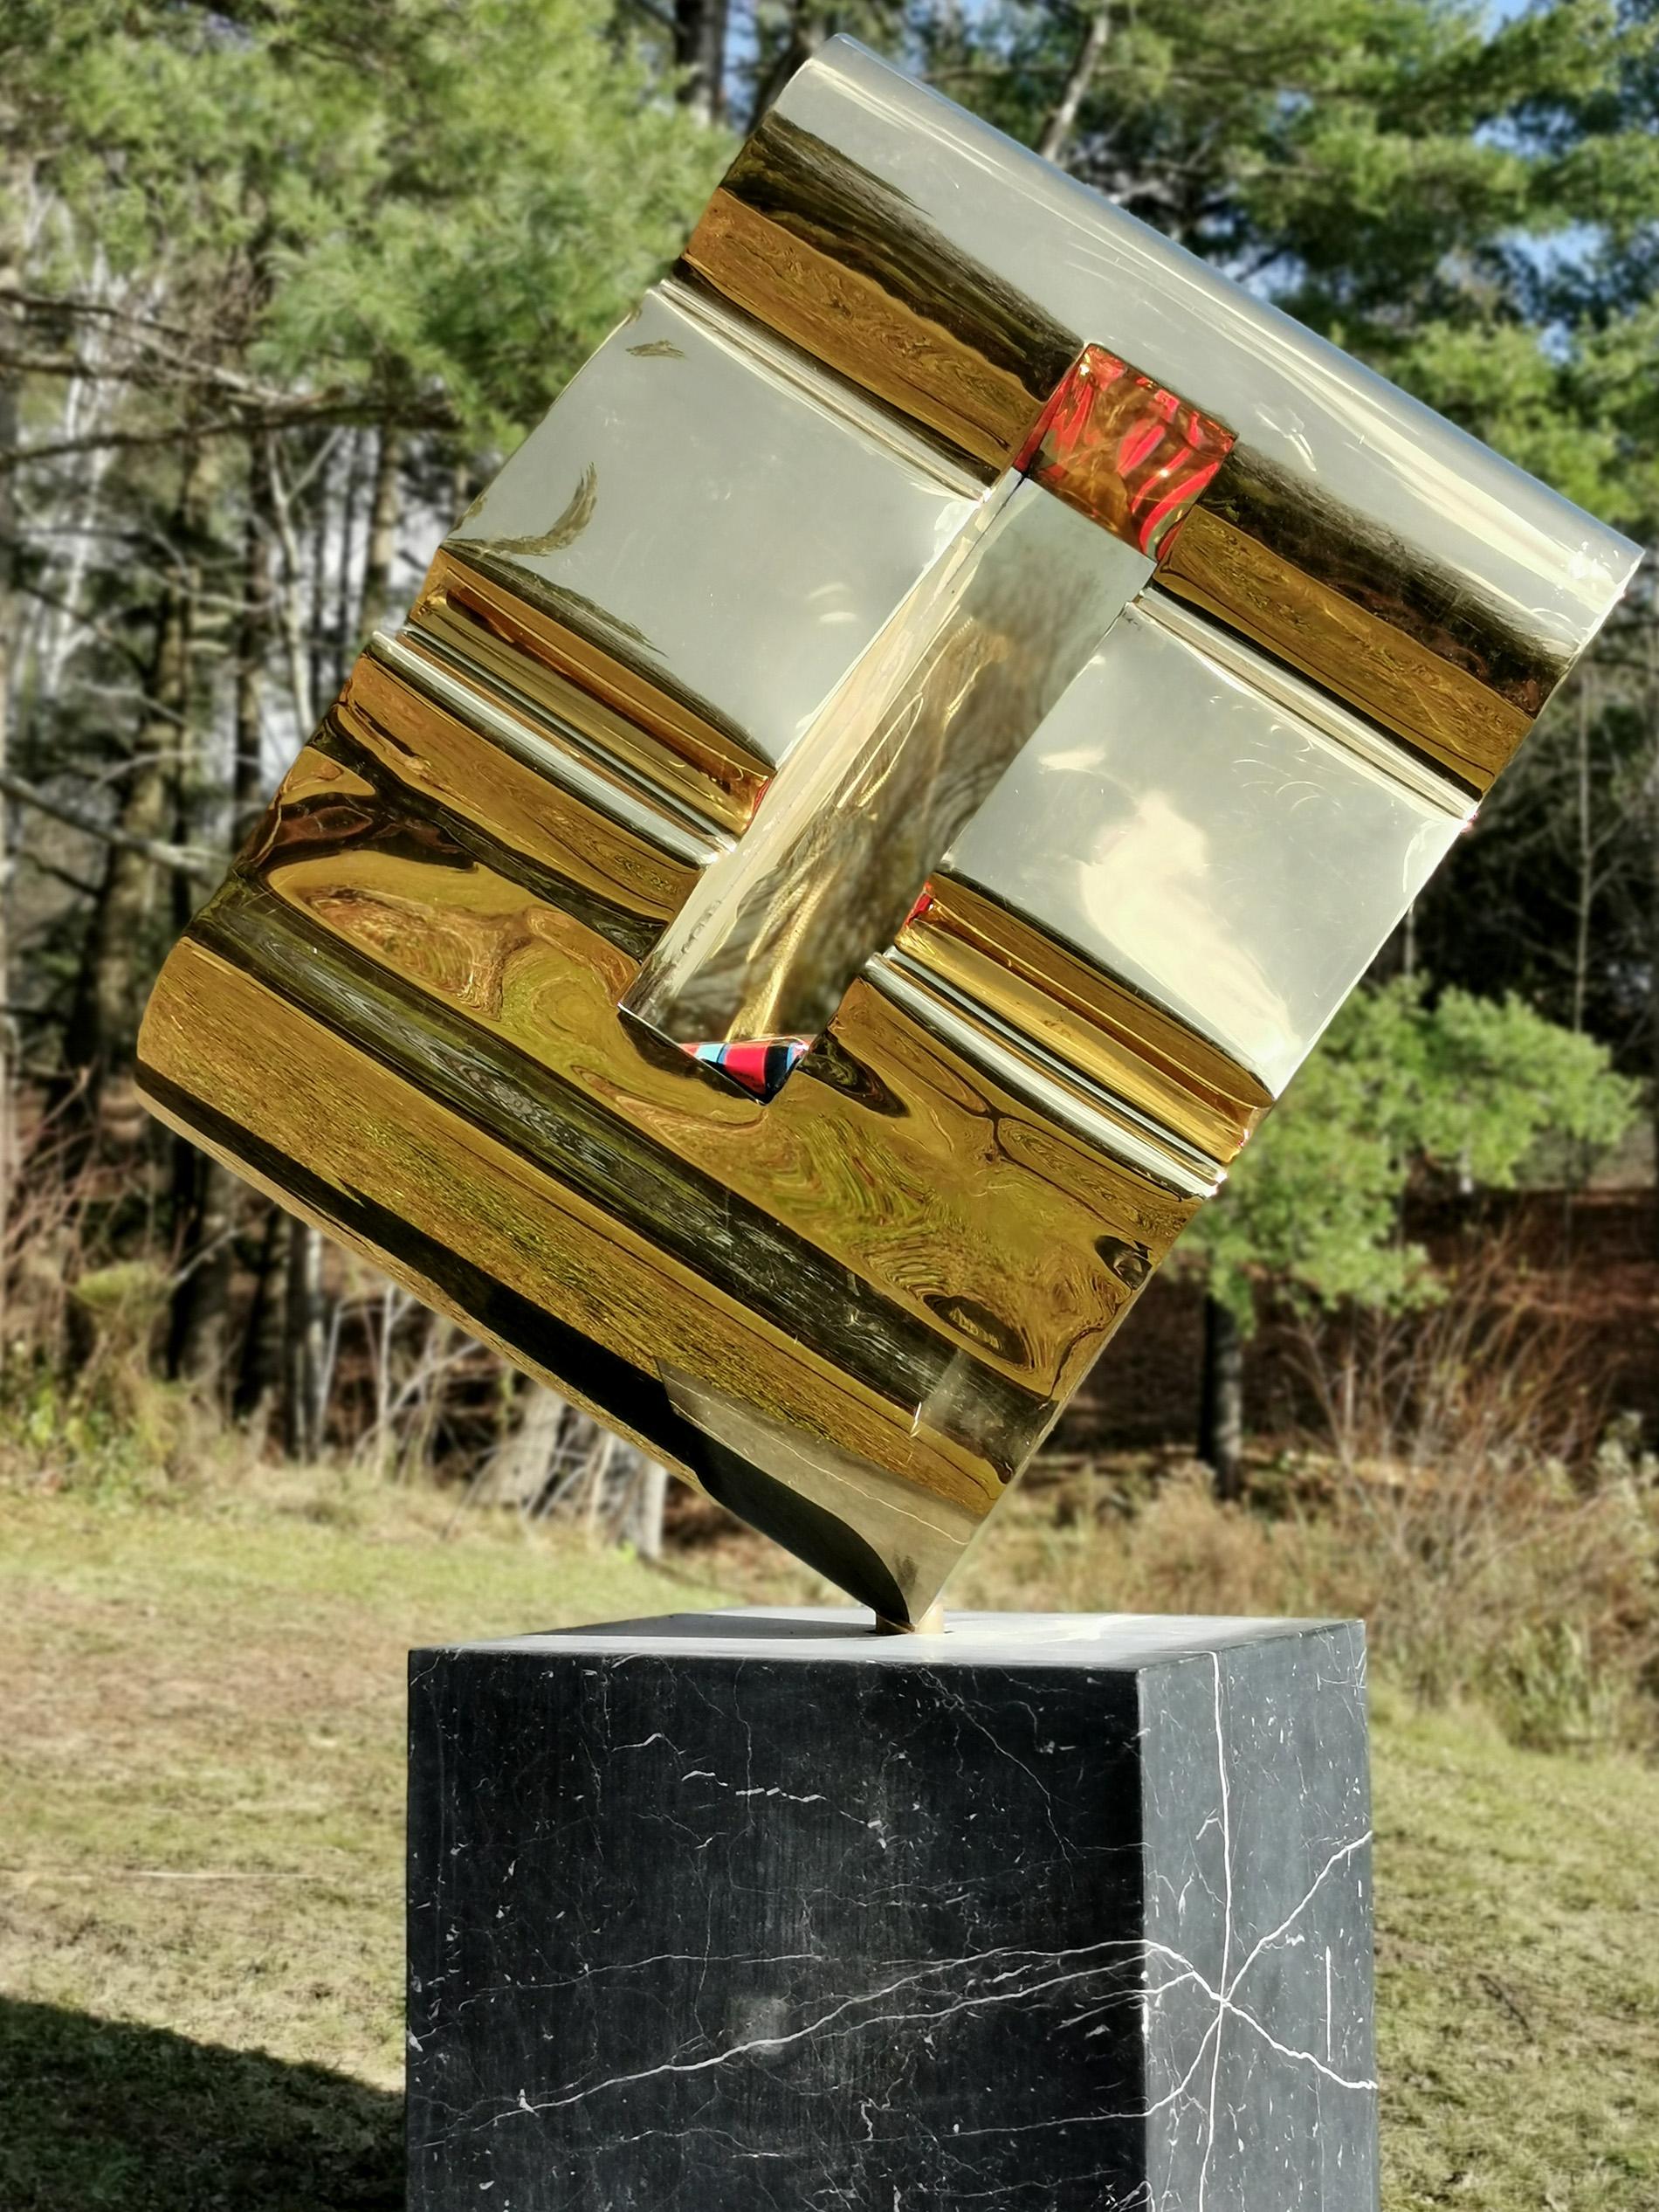 CaELum - large, abstract, 24kt gold plated, stainless steel outdoor sculpture - Sculpture by Viktor Mitic